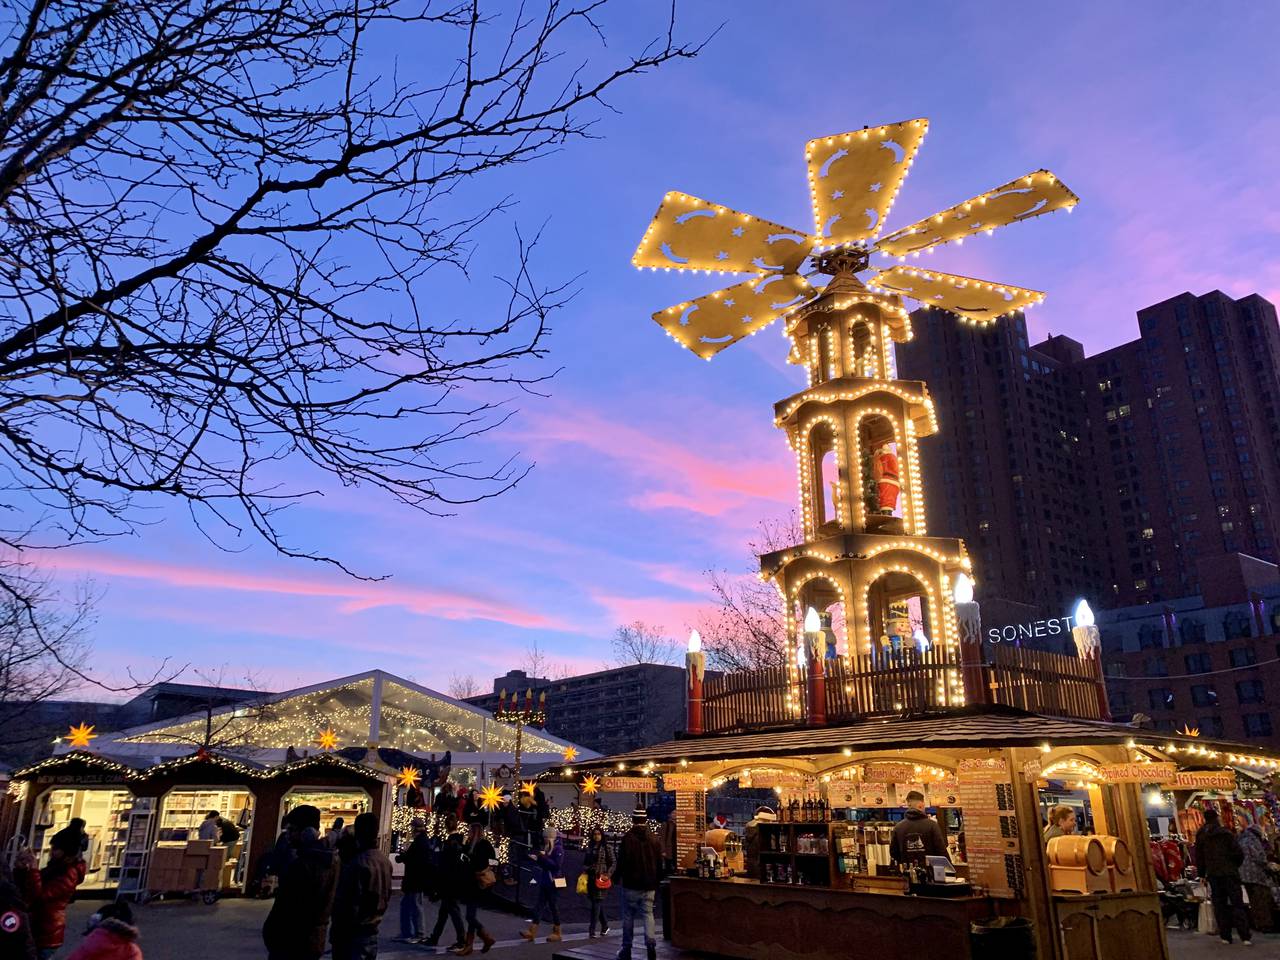 A 30-foot tall traditional Christmas pyramid in the center of a German-style Christmas market.